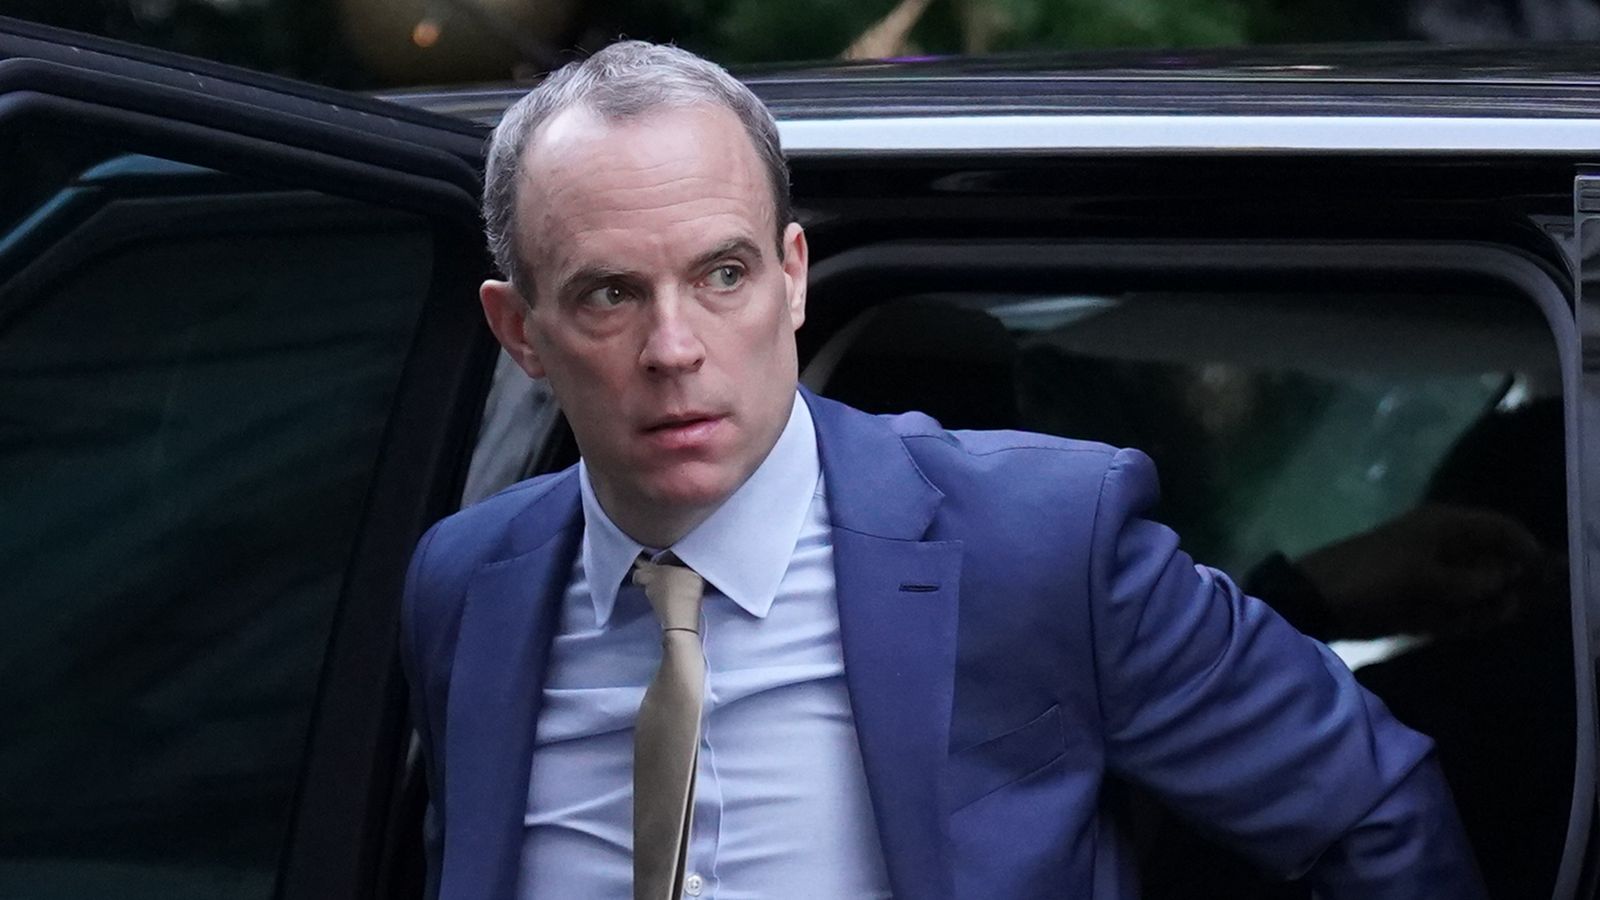 Dominic Raab resigns: The key findings from the bullying investigation that sealed his fate